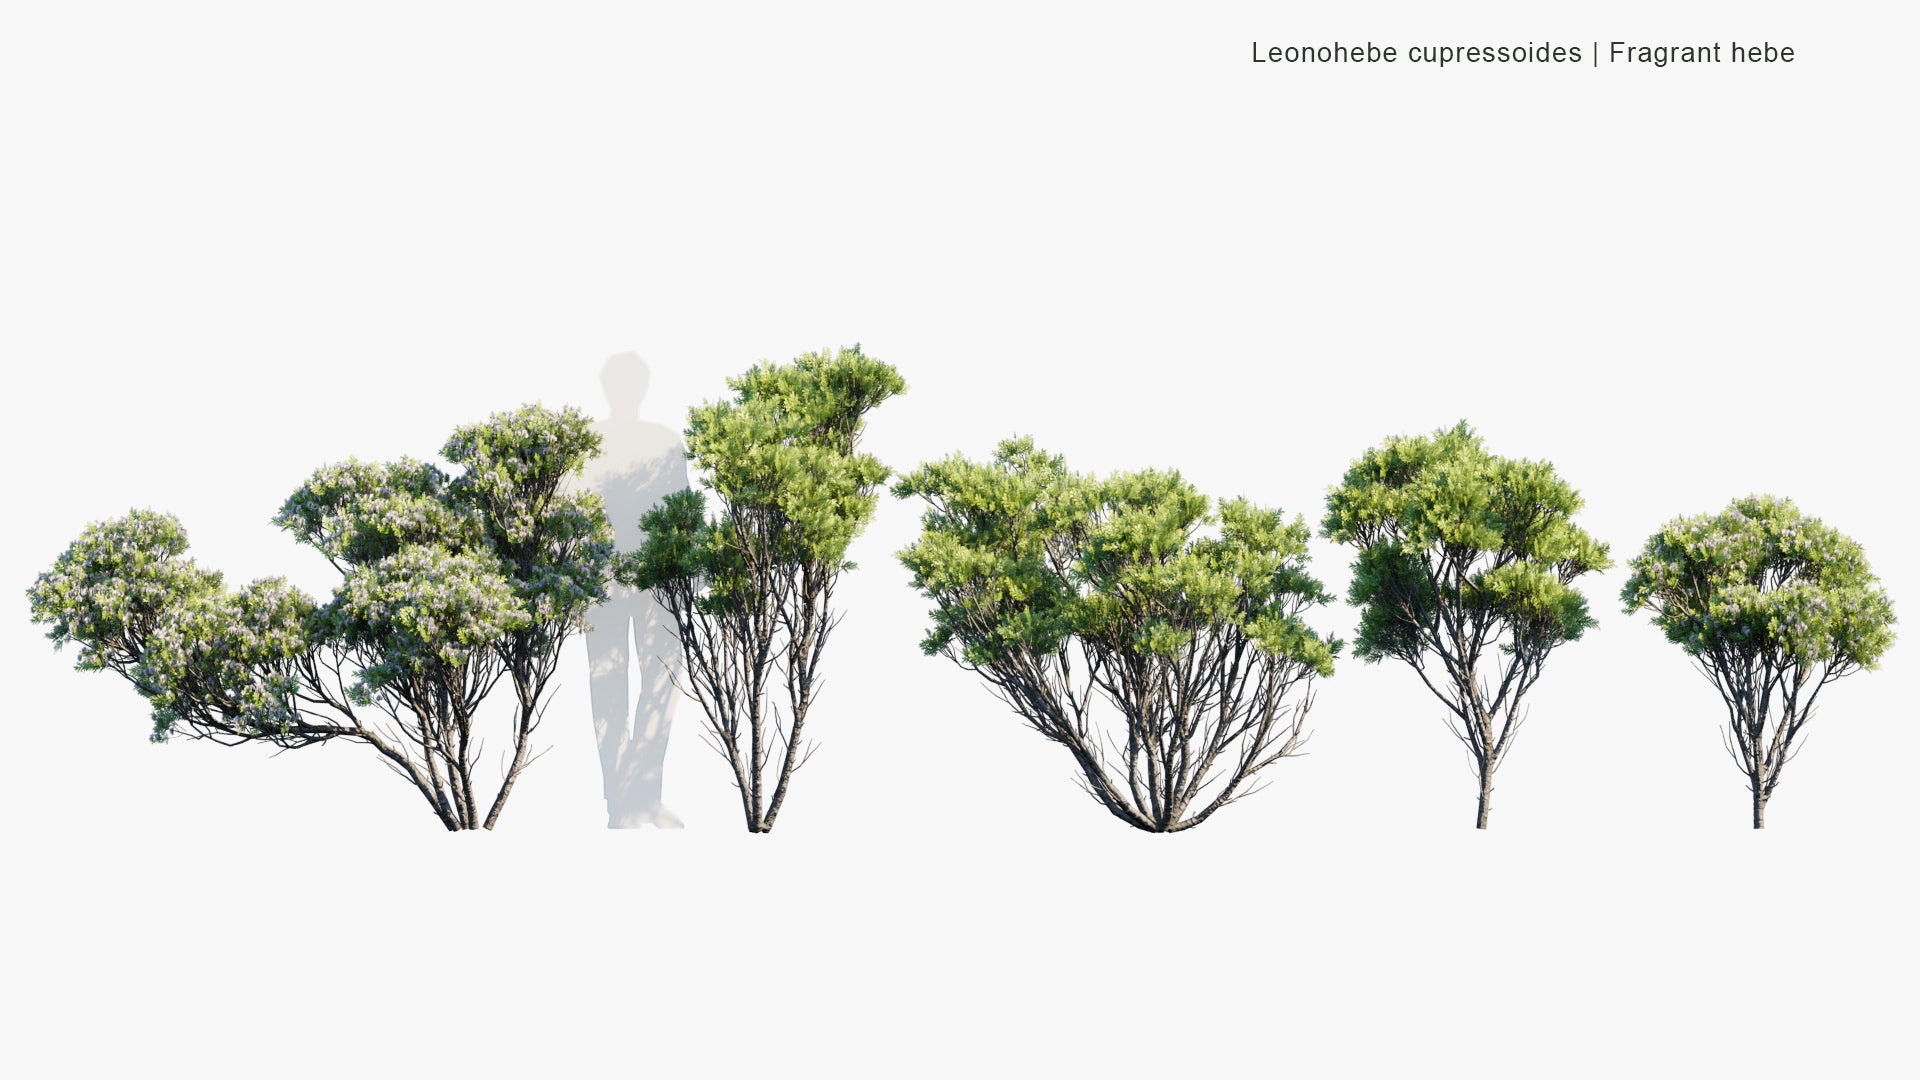 Low Poly Leonohebe Cupressoides - Fragrant Hebe (3D Model)